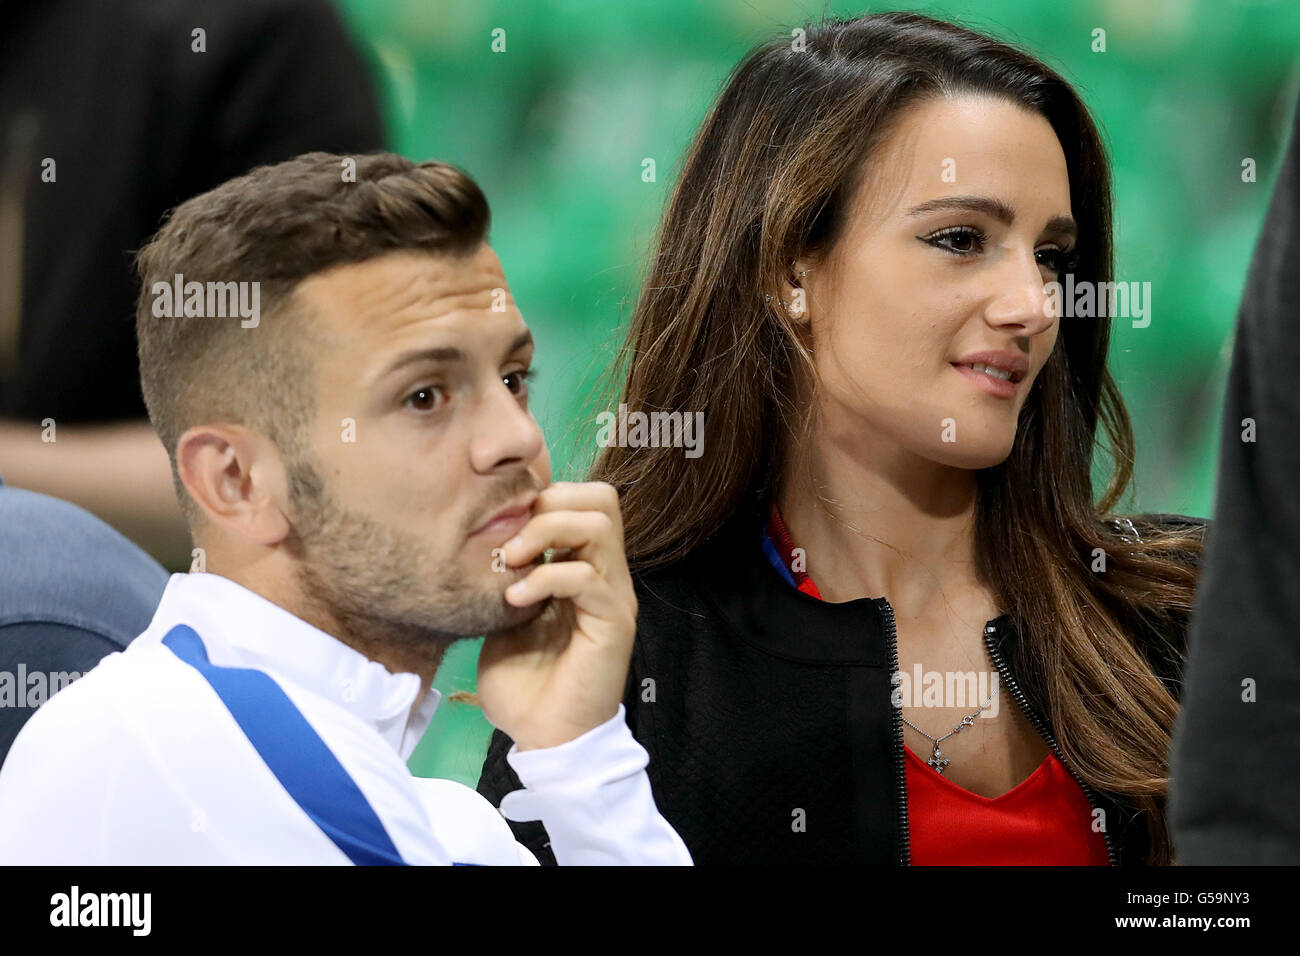 England's Jack Wilshere with his fiancee Adriana Michael during the UEFA Euro 2016, Group B match at the Stade Geoffroy Guichard, Saint-Etienne. Stock Photo